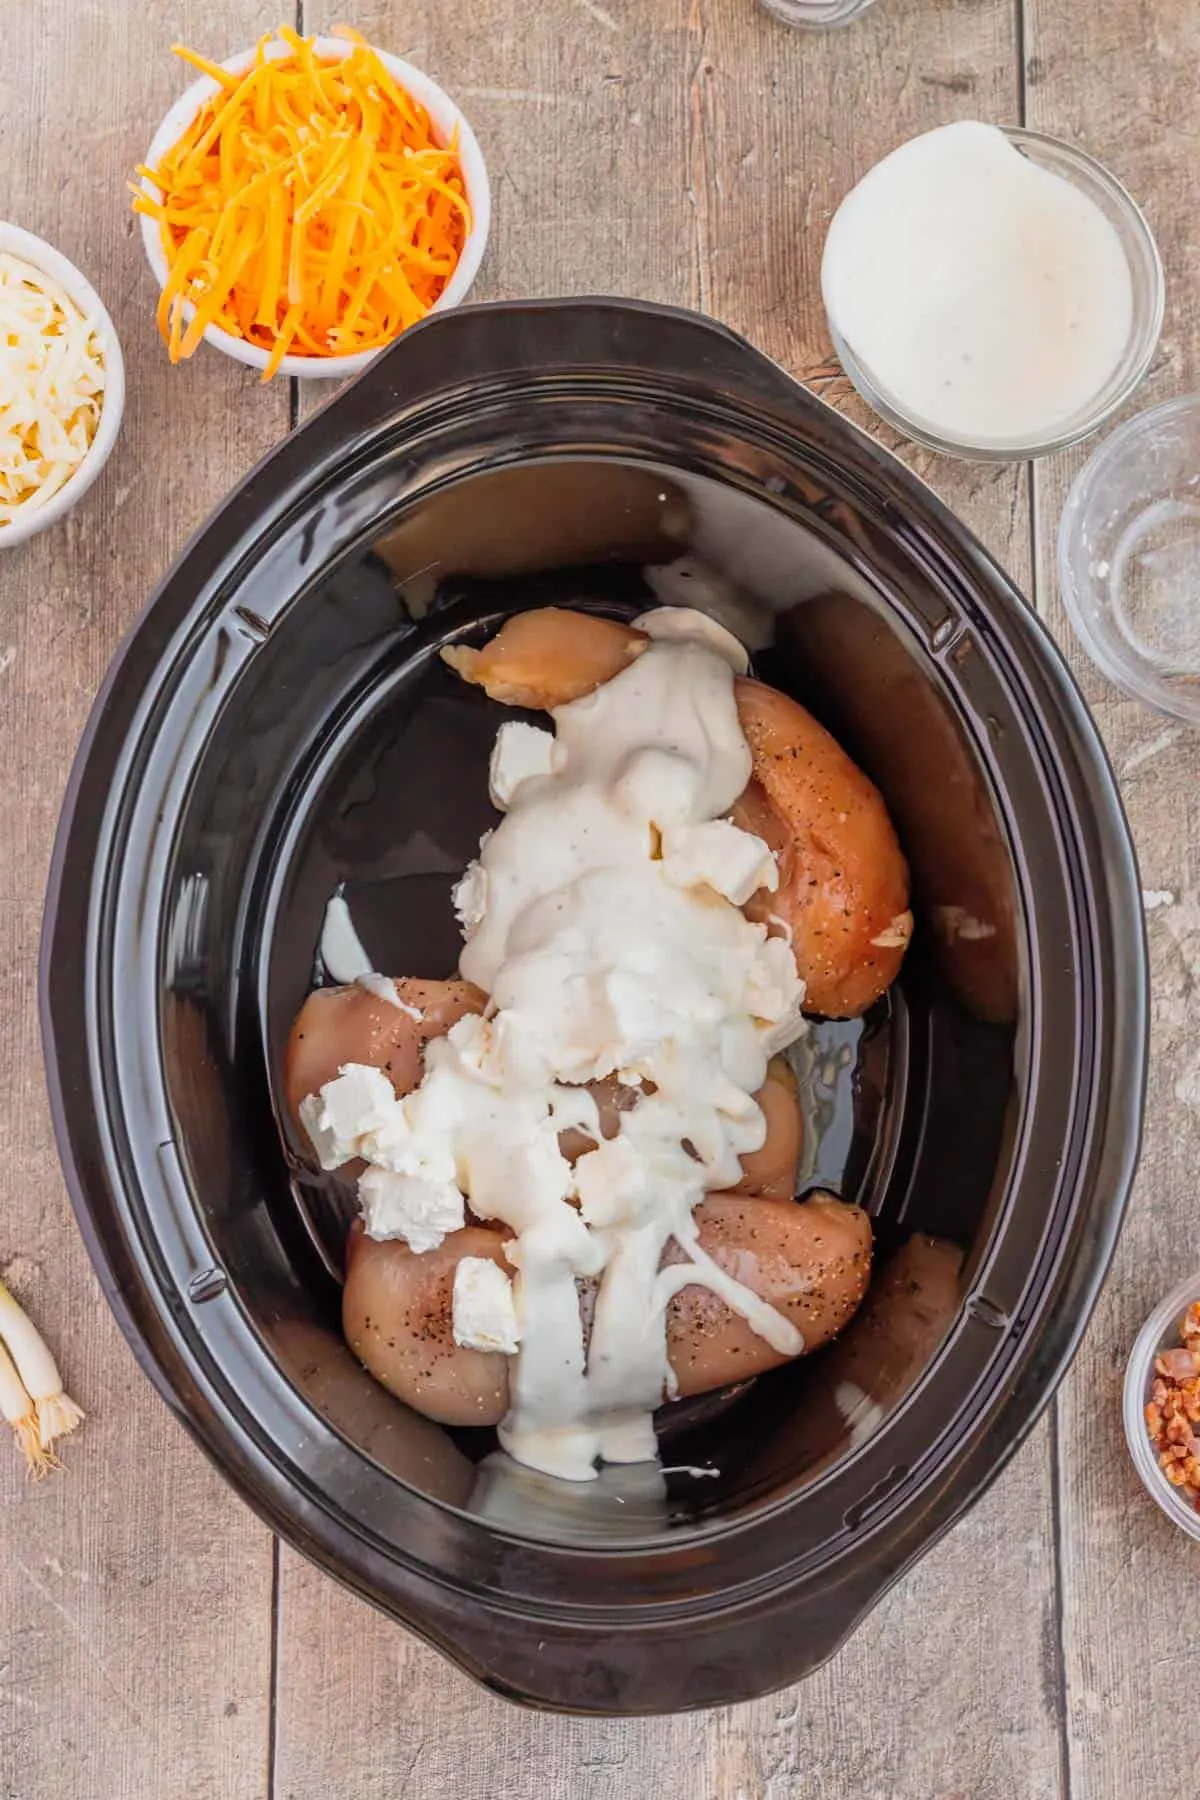 ranch dressing and cubes of cream cheese on top of chicken breasts in a slow cooker